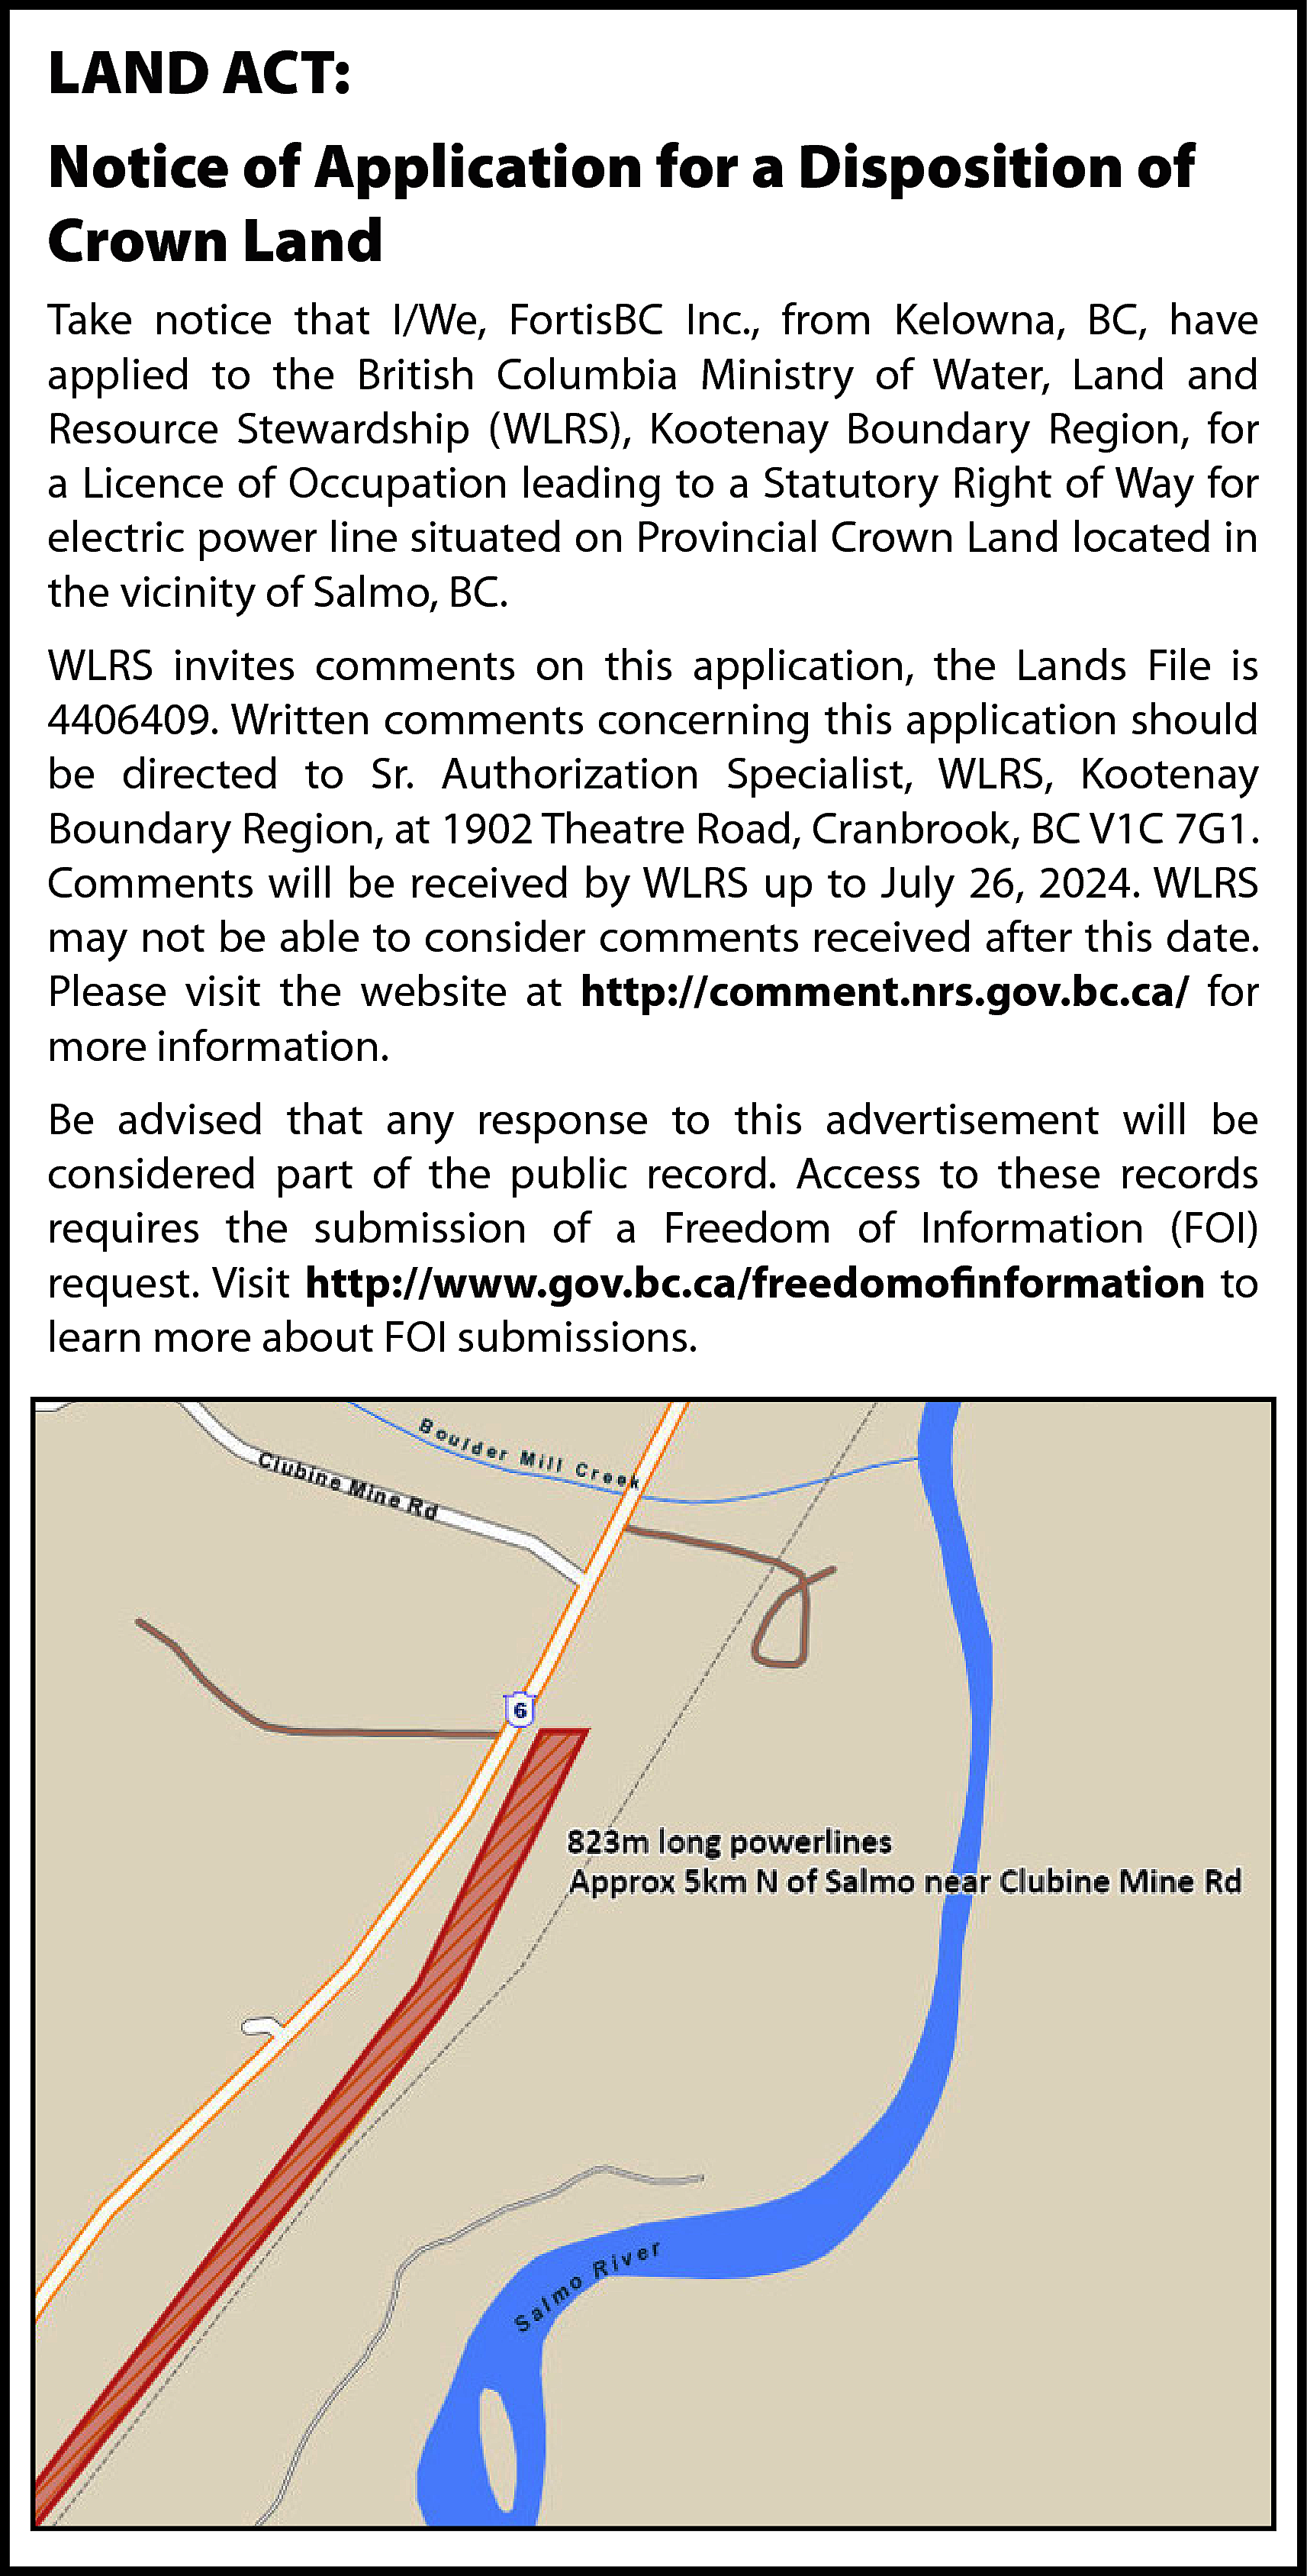 LAND ACT: <br>Notice of Application  LAND ACT:  Notice of Application for a Disposition of  Crown Land  Take notice that I/We, FortisBC Inc., from Kelowna, BC, have  applied to the British Columbia Ministry of Water, Land and  Resource Stewardship (WLRS), Kootenay Boundary Region, for  a Licence of Occupation leading to a Statutory Right of Way for  electric power line situated on Provincial Crown Land located in  the vicinity of Salmo, BC.  WLRS invites comments on this application, the Lands File is  4406409. Written comments concerning this application should  be directed to Sr. Authorization Specialist, WLRS, Kootenay  Boundary Region, at 1902 Theatre Road, Cranbrook, BC V1C 7G1.  Comments will be received by WLRS up to July 26, 2024. WLRS  may not be able to consider comments received after this date.  Please visit the website at http://comment.nrs.gov.bc.ca/ for  more information.  Be advised that any response to this advertisement will be  considered part of the public record. Access to these records  requires the submission of a Freedom of Information (FOI)  request. Visit http://www.gov.bc.ca/freedomofinformation to  learn more about FOI submissions.    